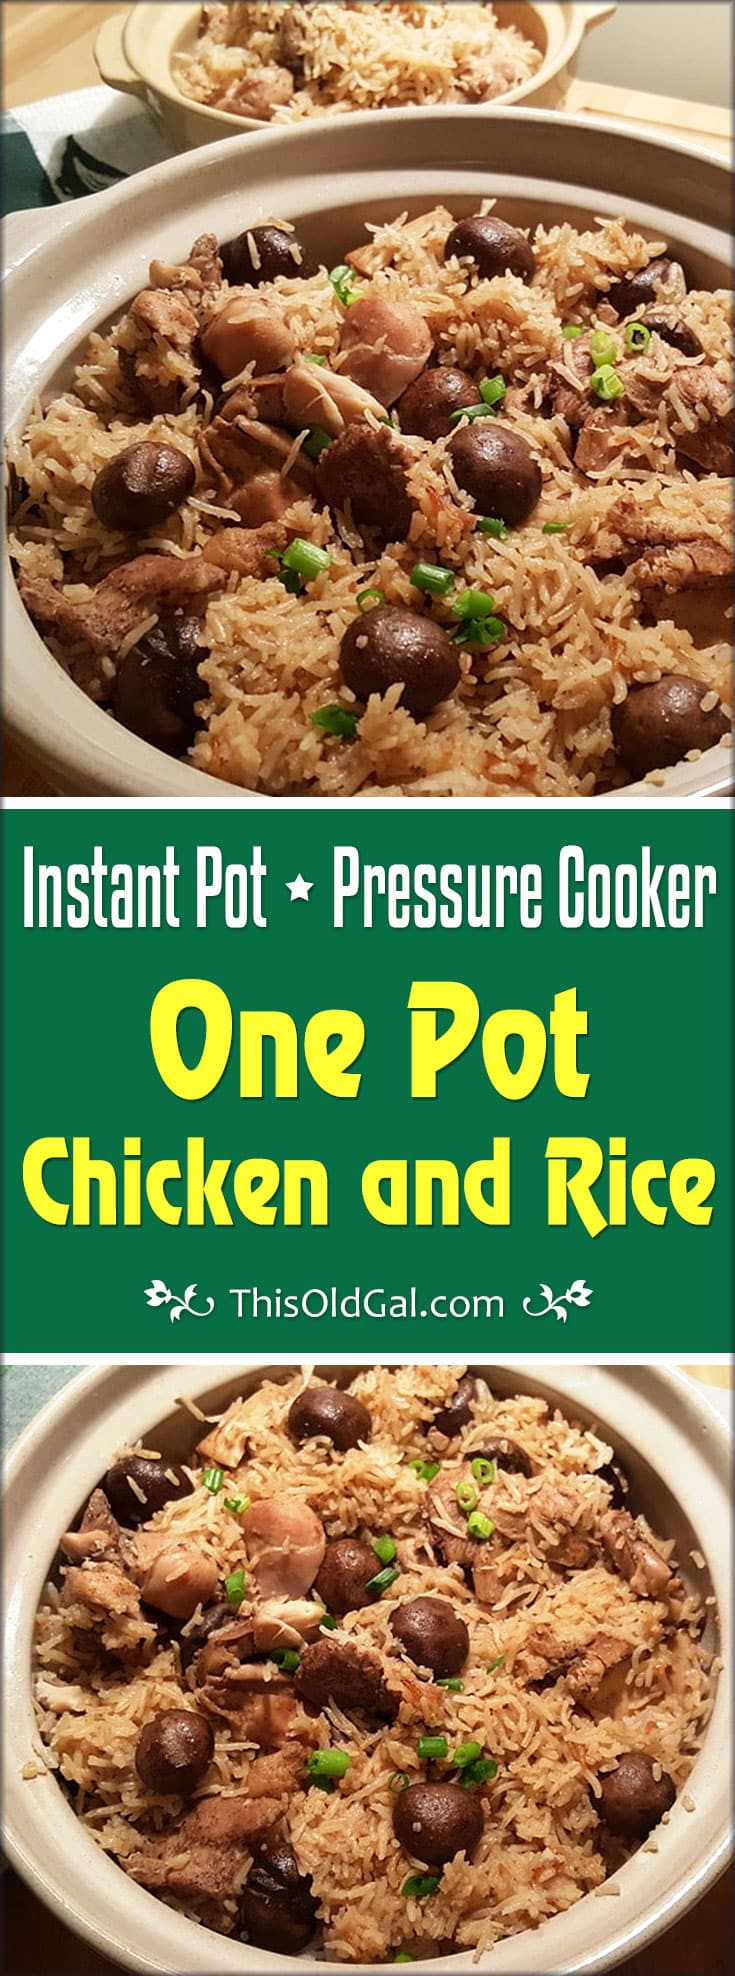 Pressure Cooker One Pot Chicken and Rice